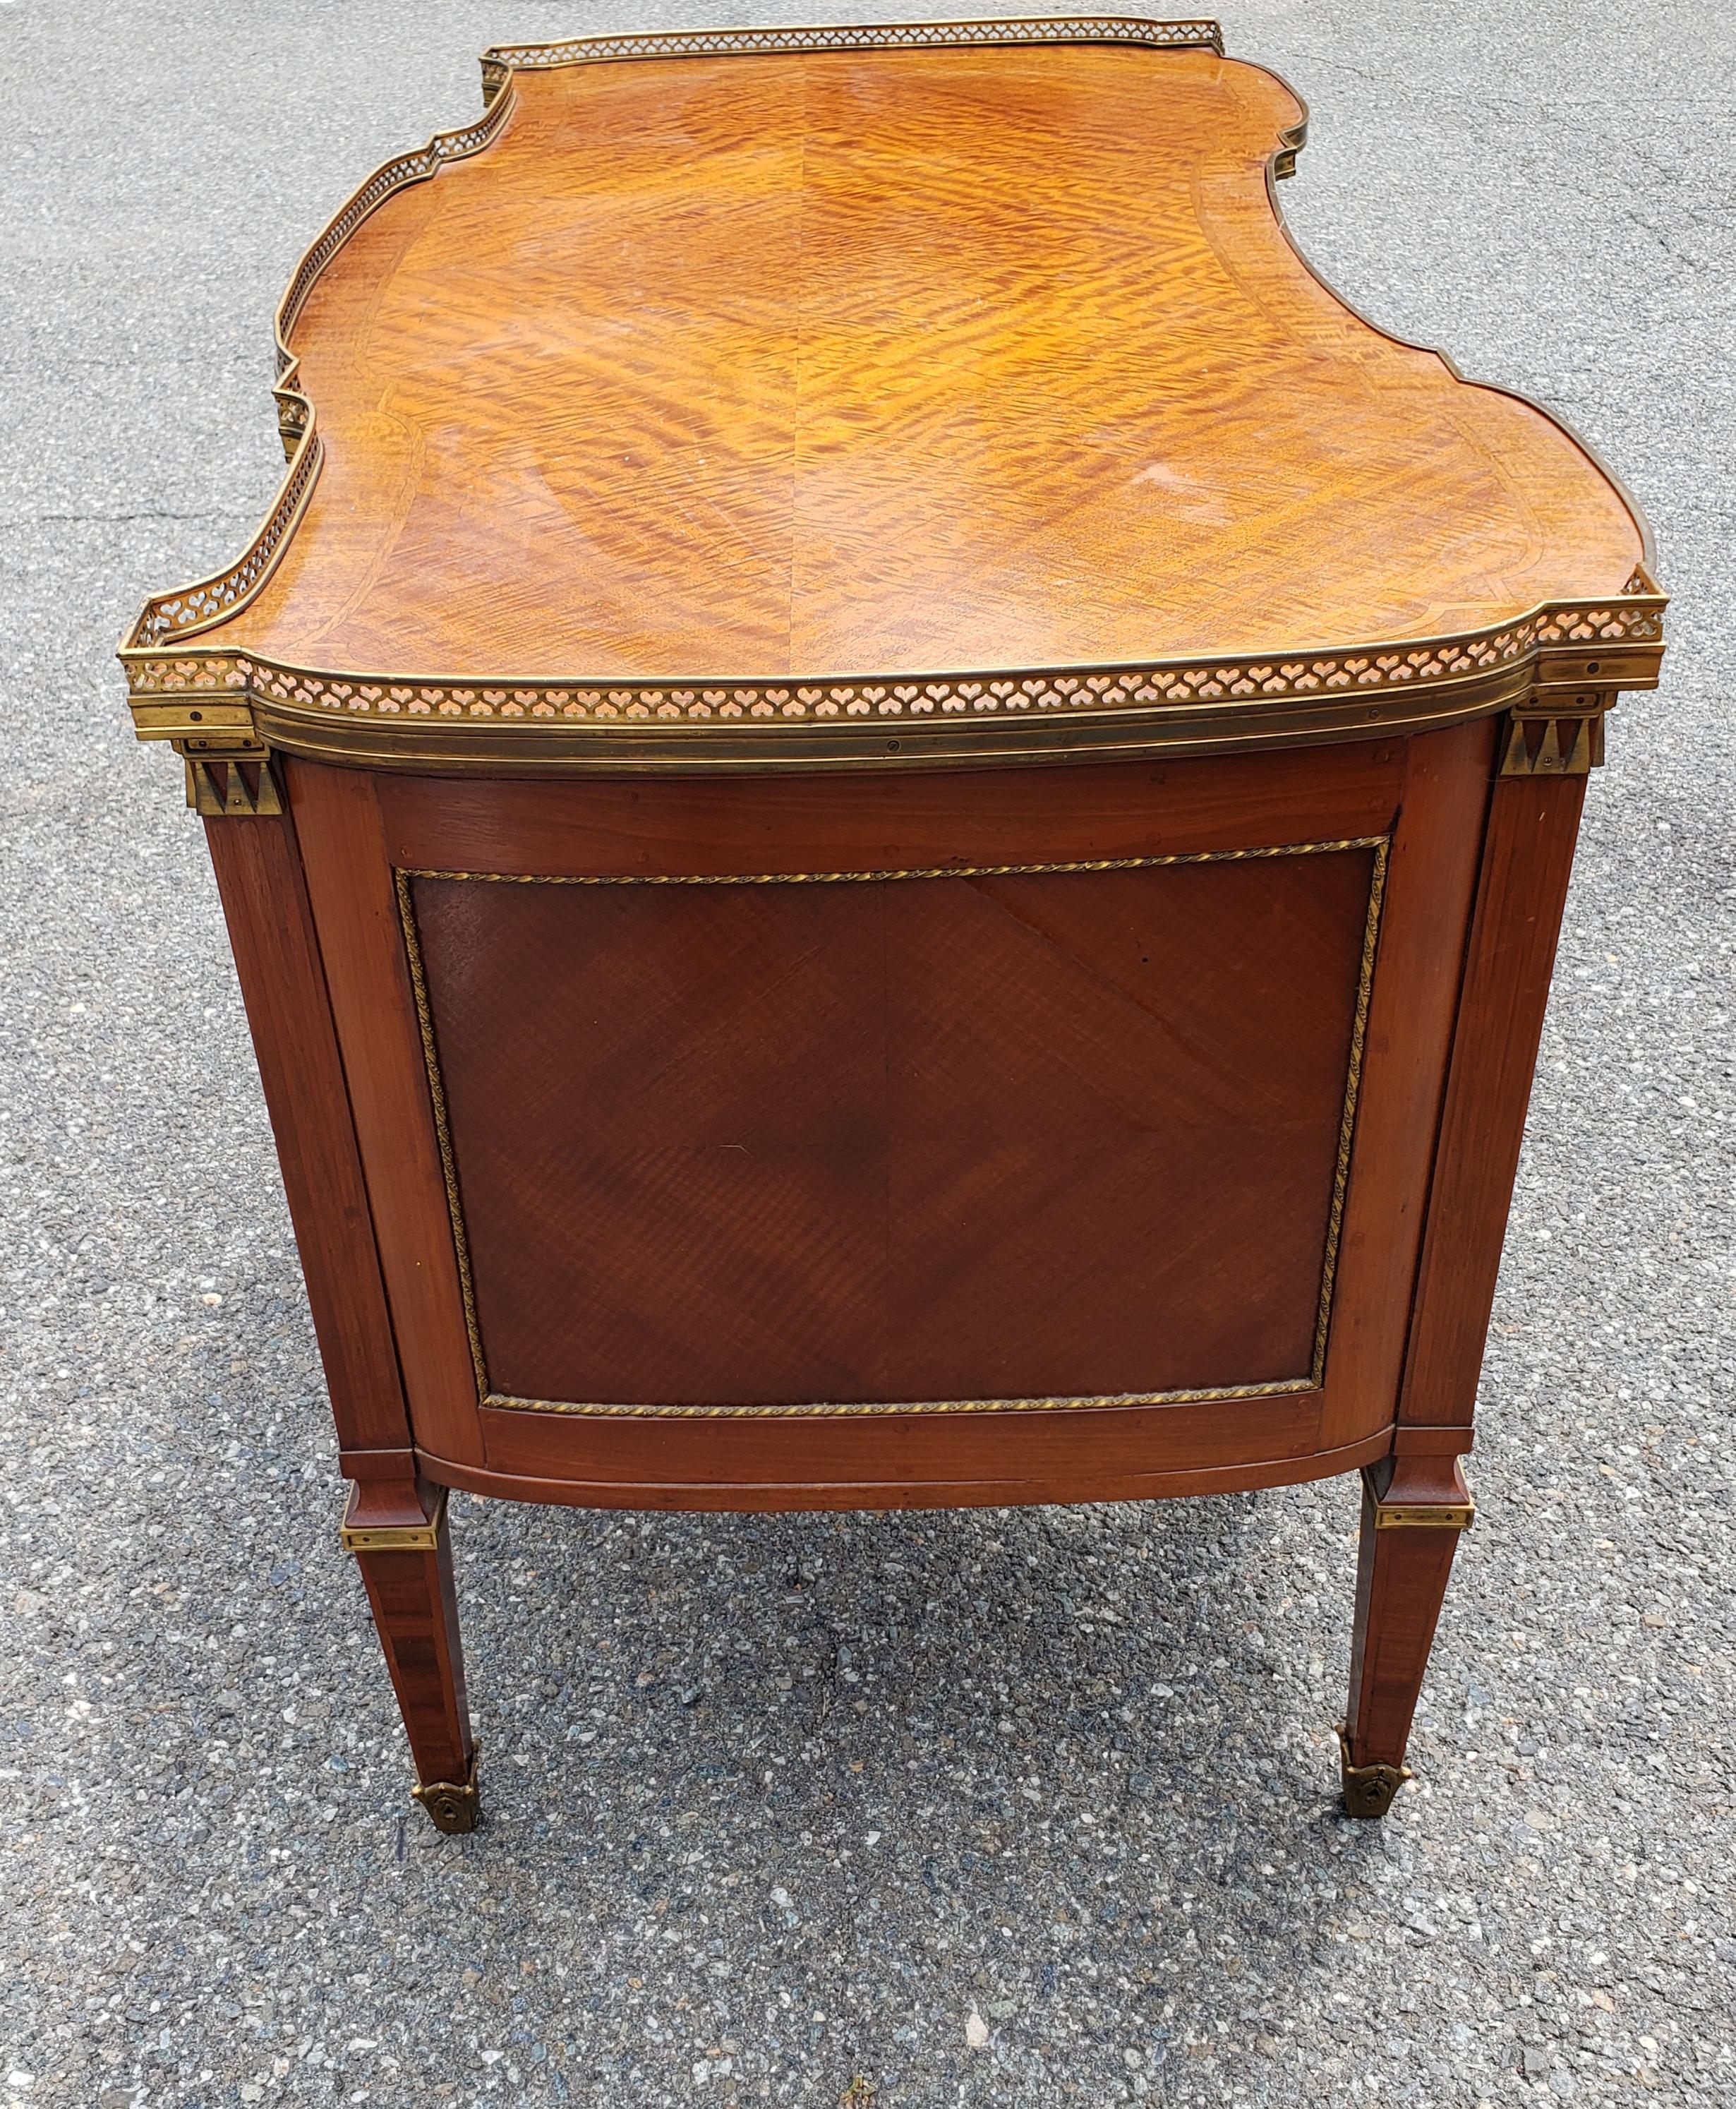 Louis XVI Style Ormolu Mounted Galleried Mahogany Burl and Marquetry Desk  For Sale 5